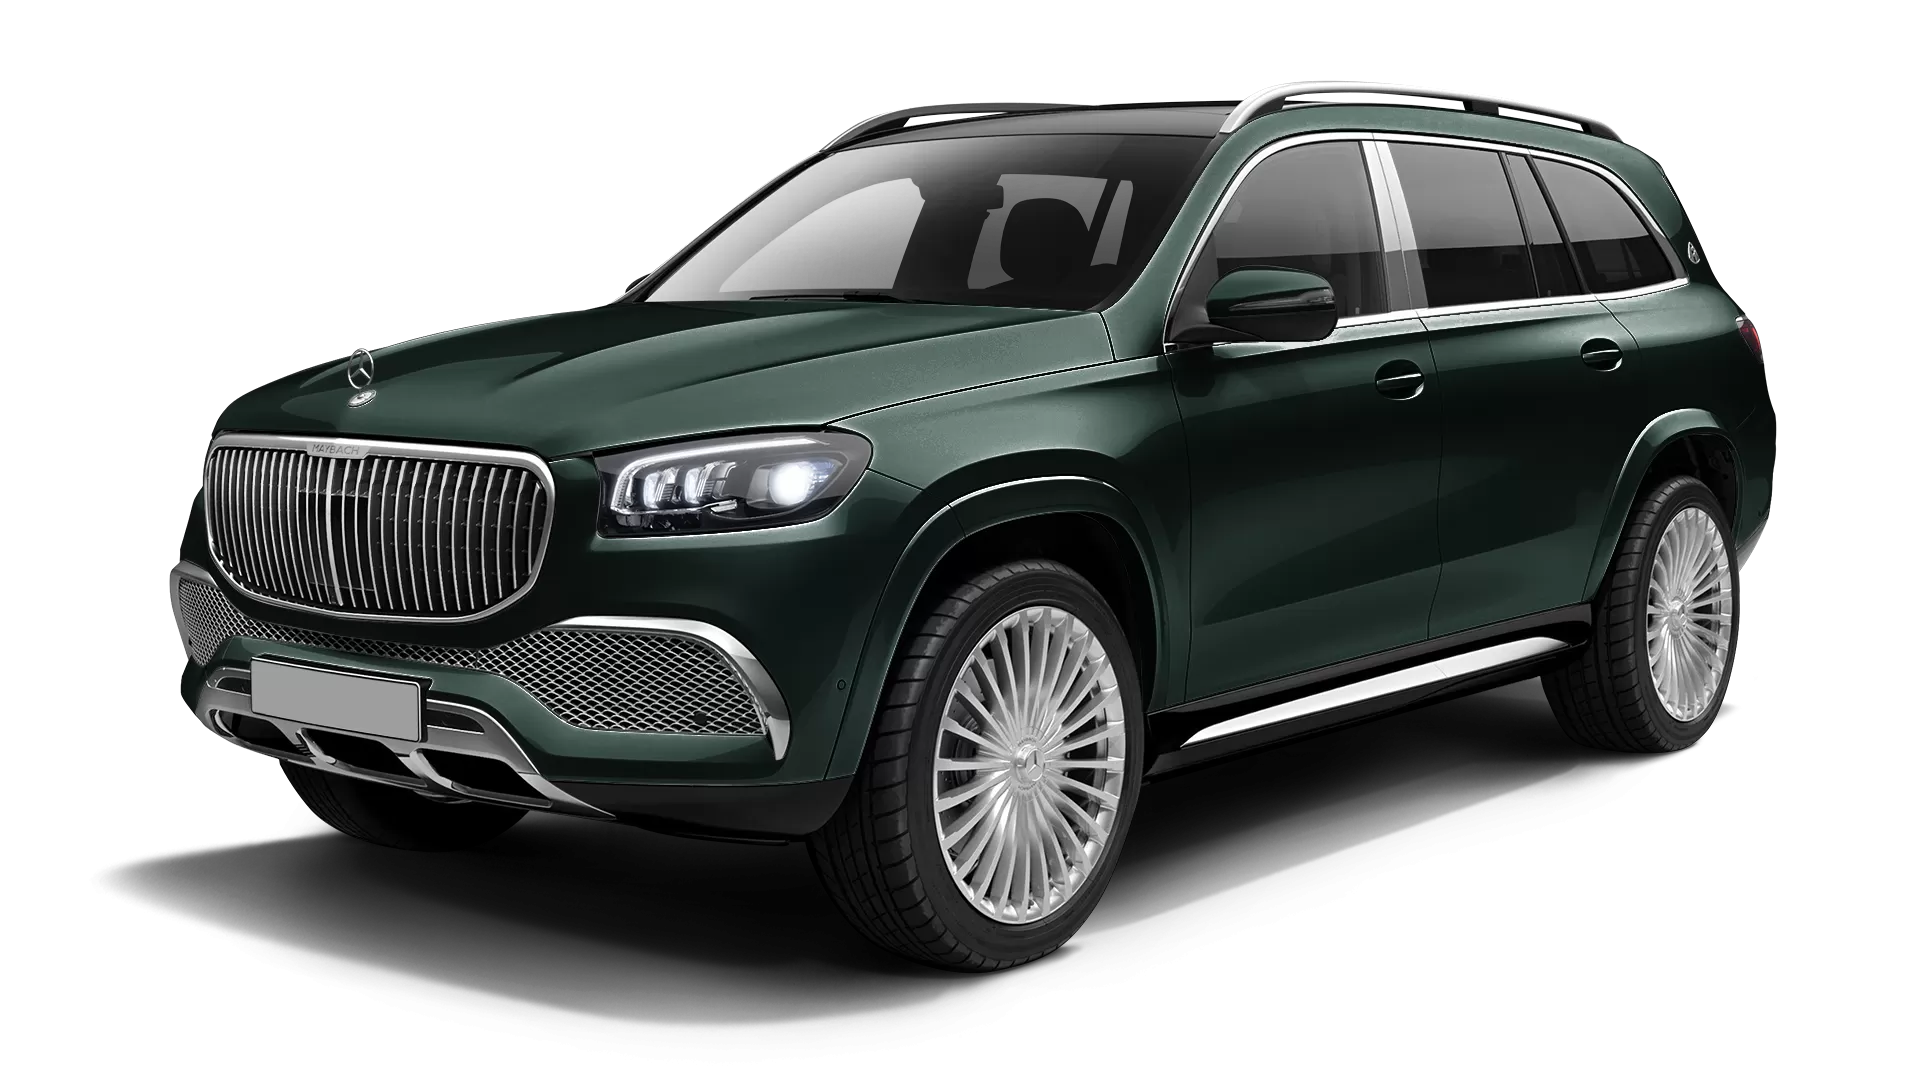 Mercedes Maybach GLS 600 stock front view in Emerald Green color